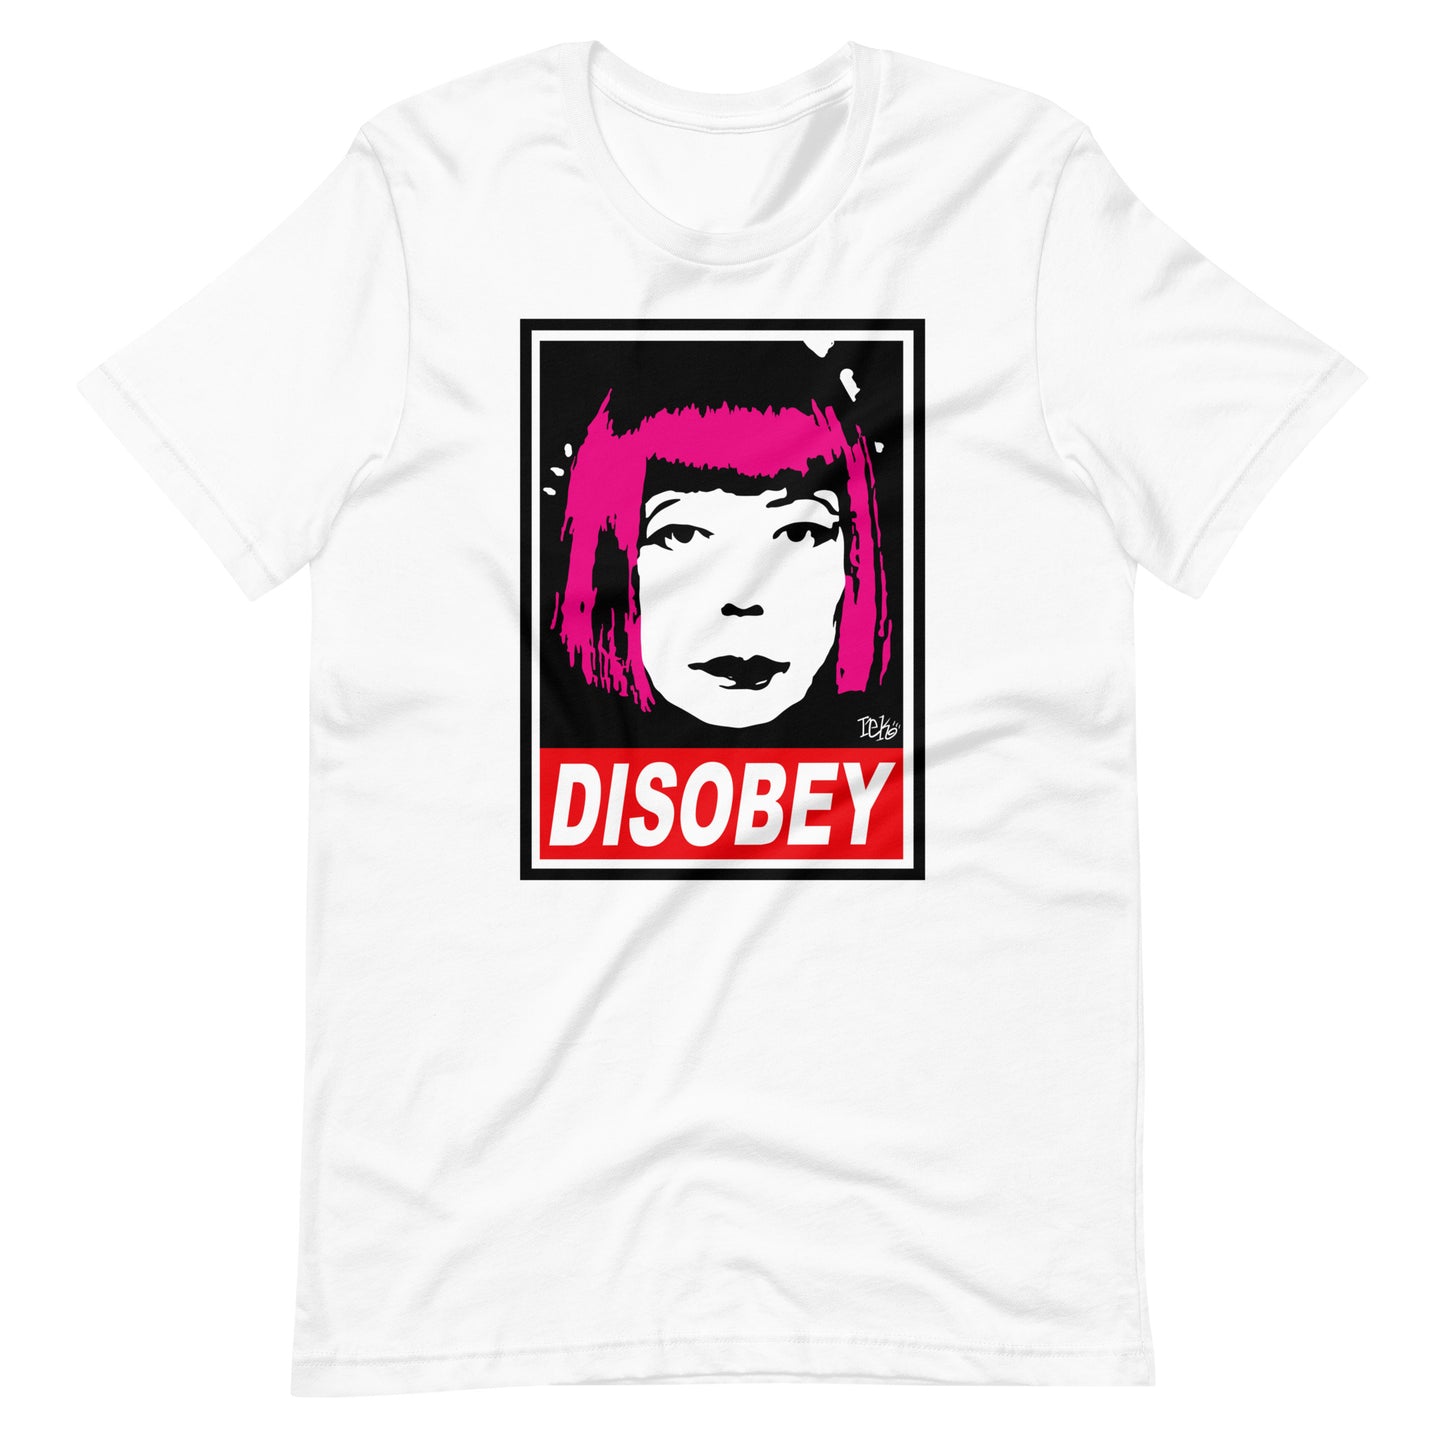 Disobey Pink T-shirt